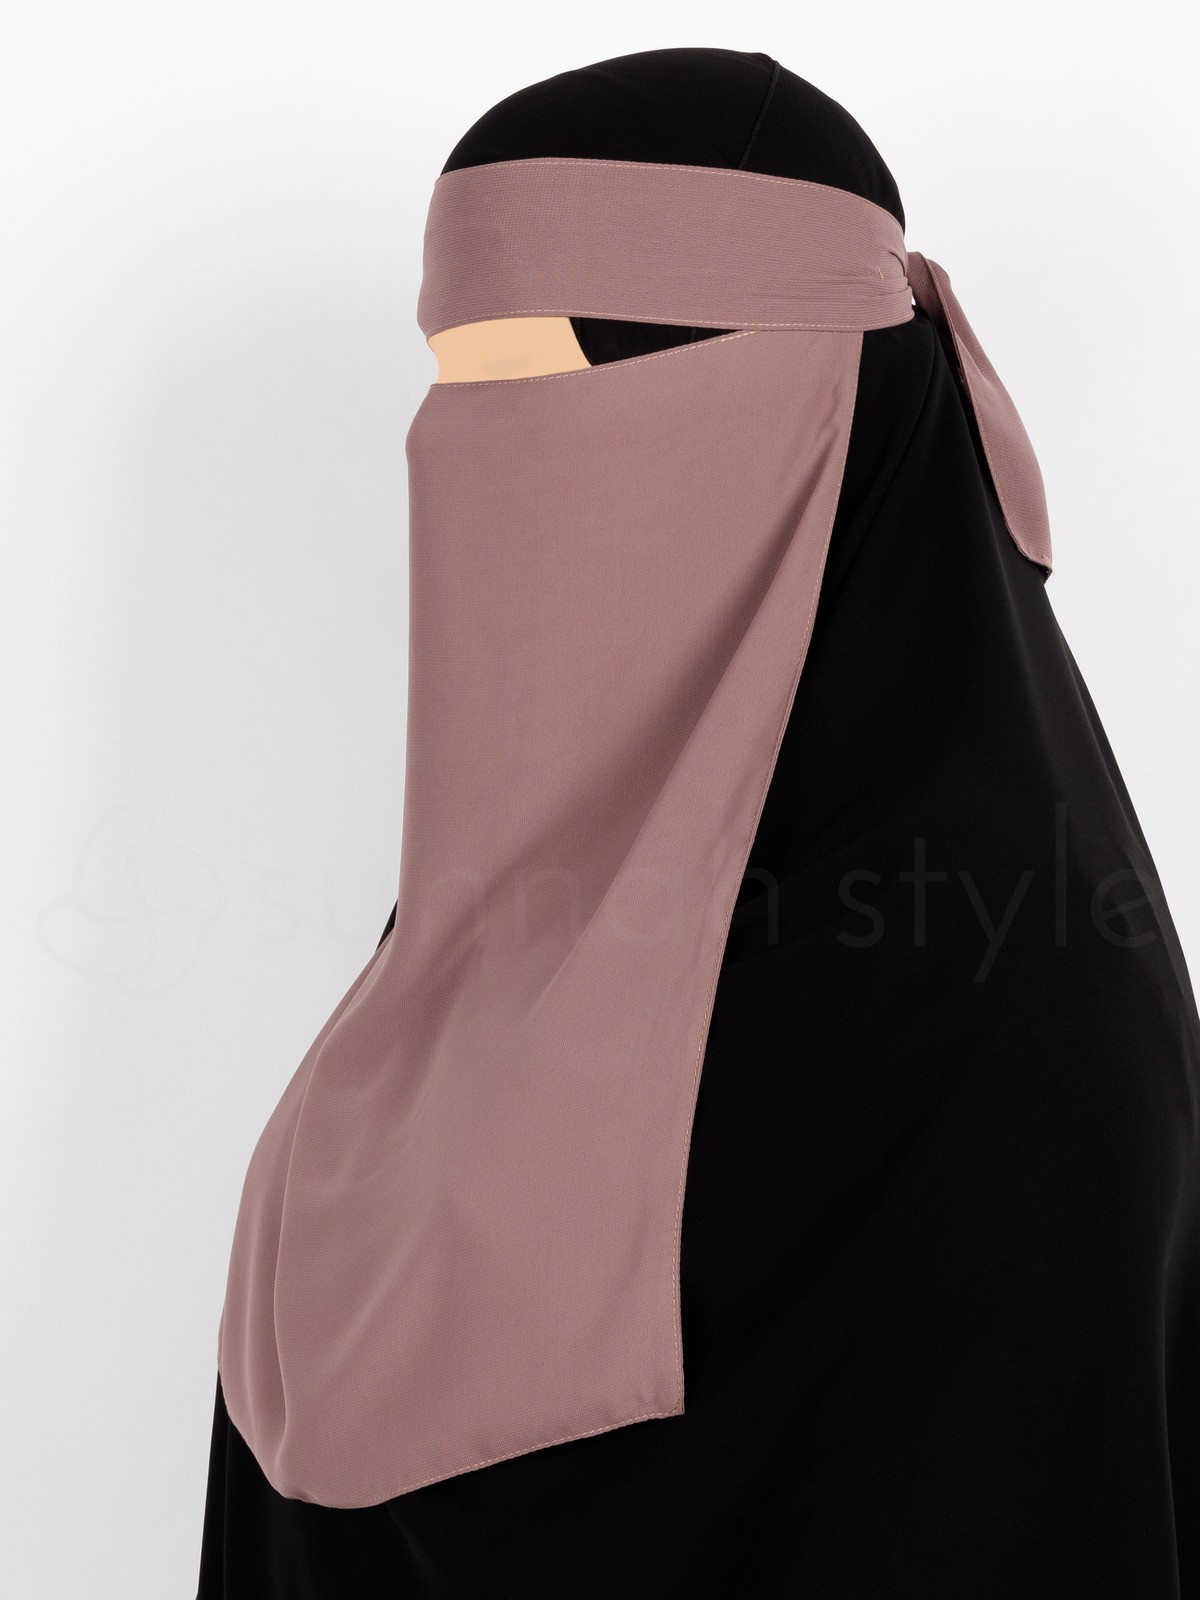 Sunnah Style - Pull-Down One Layer Niqab (Twilight Mauve)